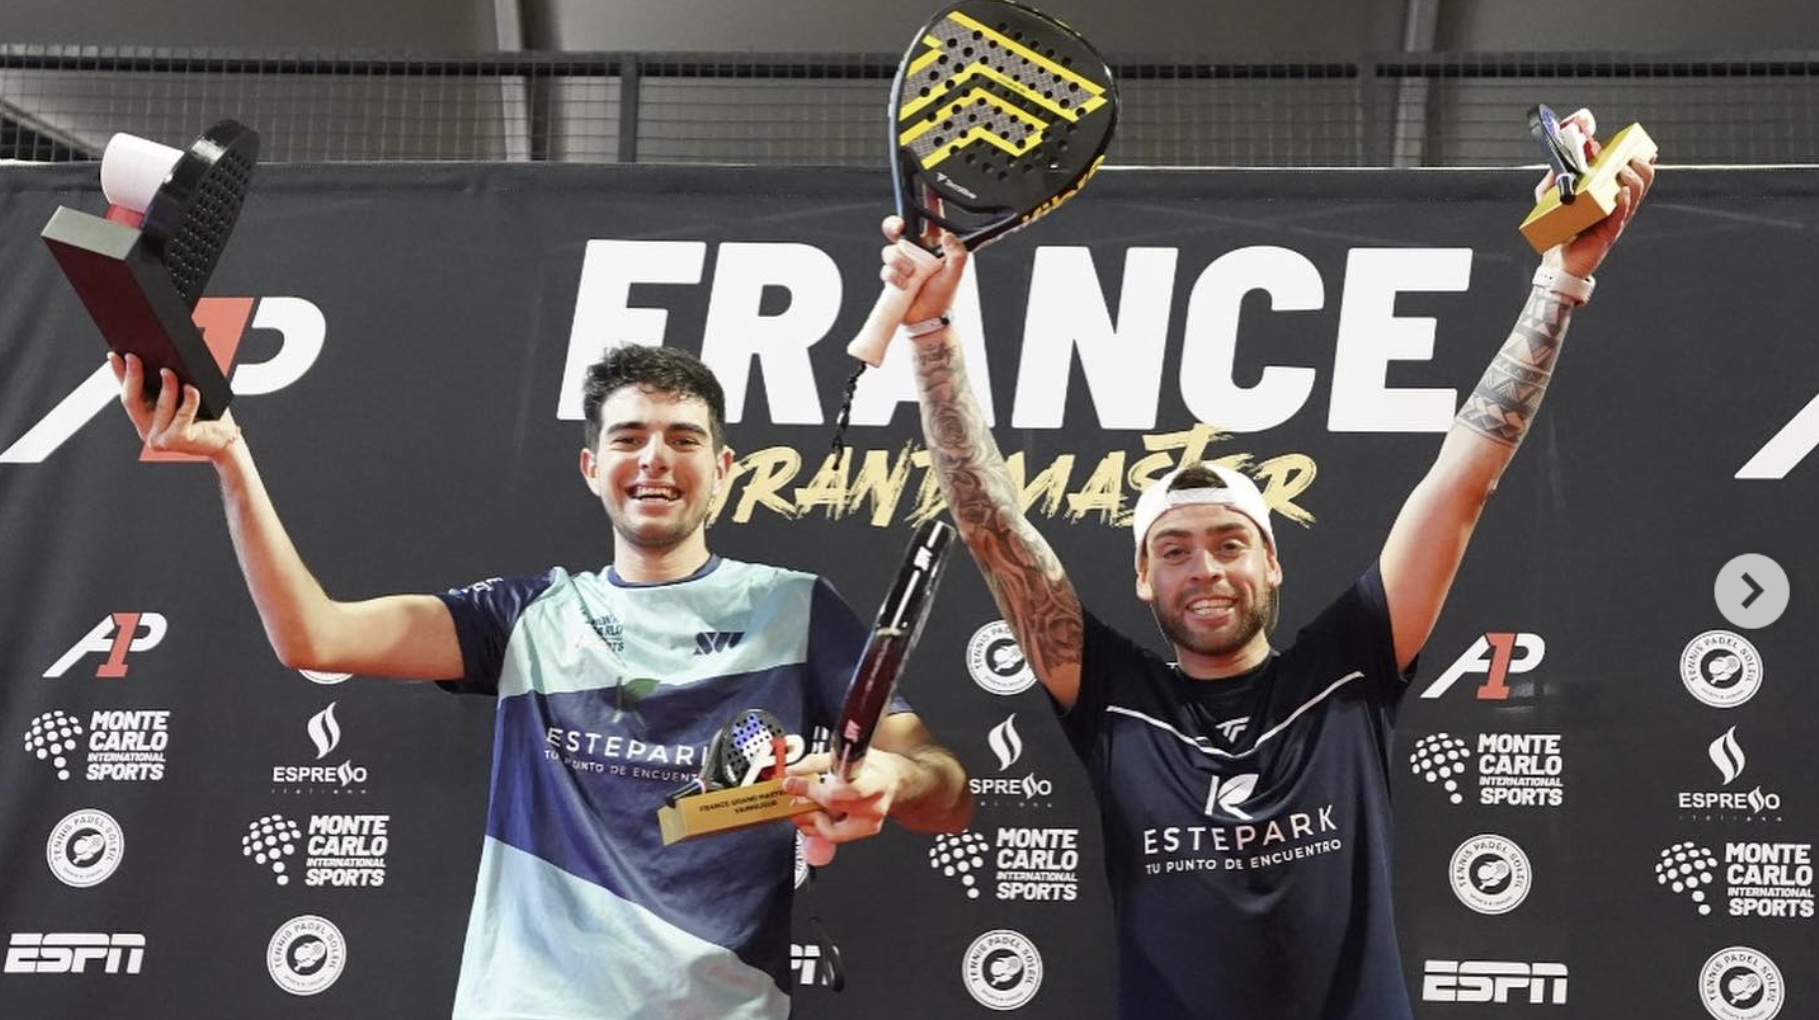 A1 Padel – Juani De Pascual and Gonza Alfonso win the France Grand Master